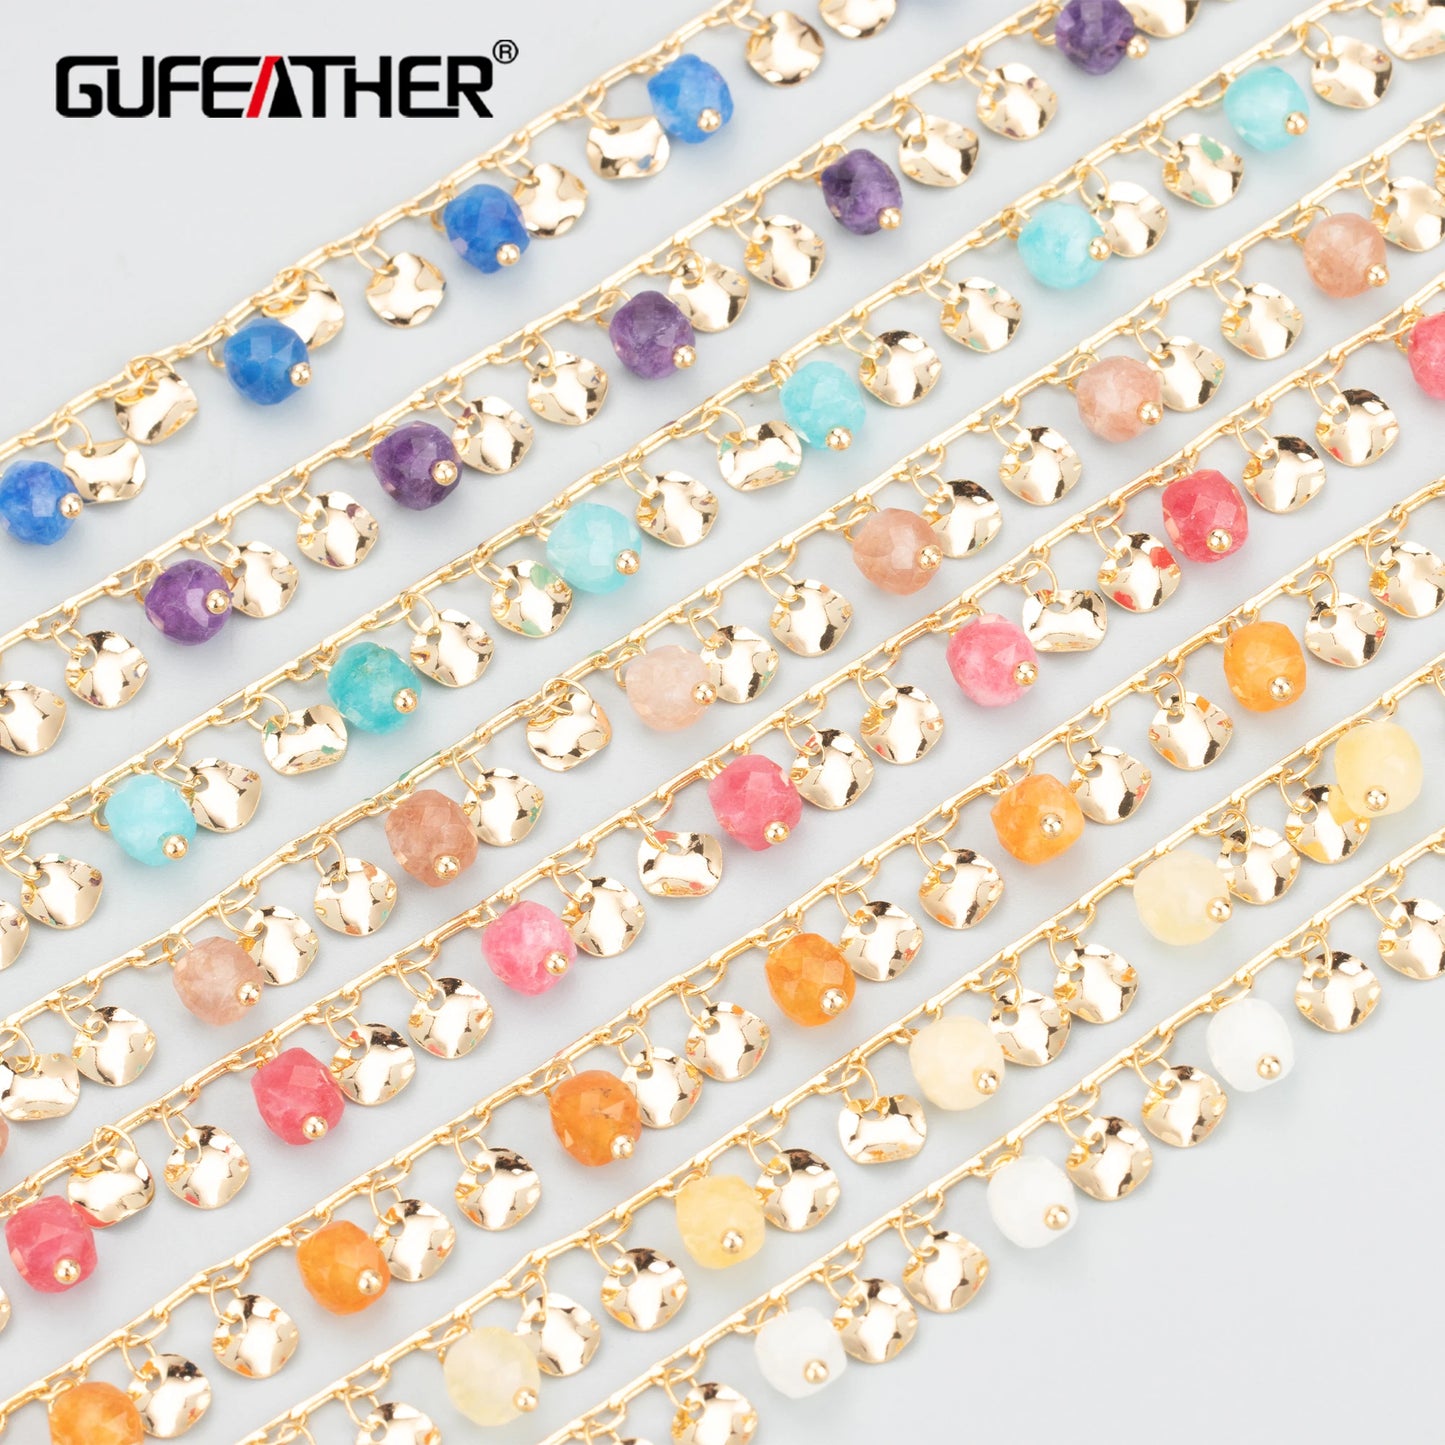 GUFEATHER C305,diy chain,nickel free,18k gold plated,copper,natural stone,jewelry making findings,diy bracelet necklace,50cm/lot